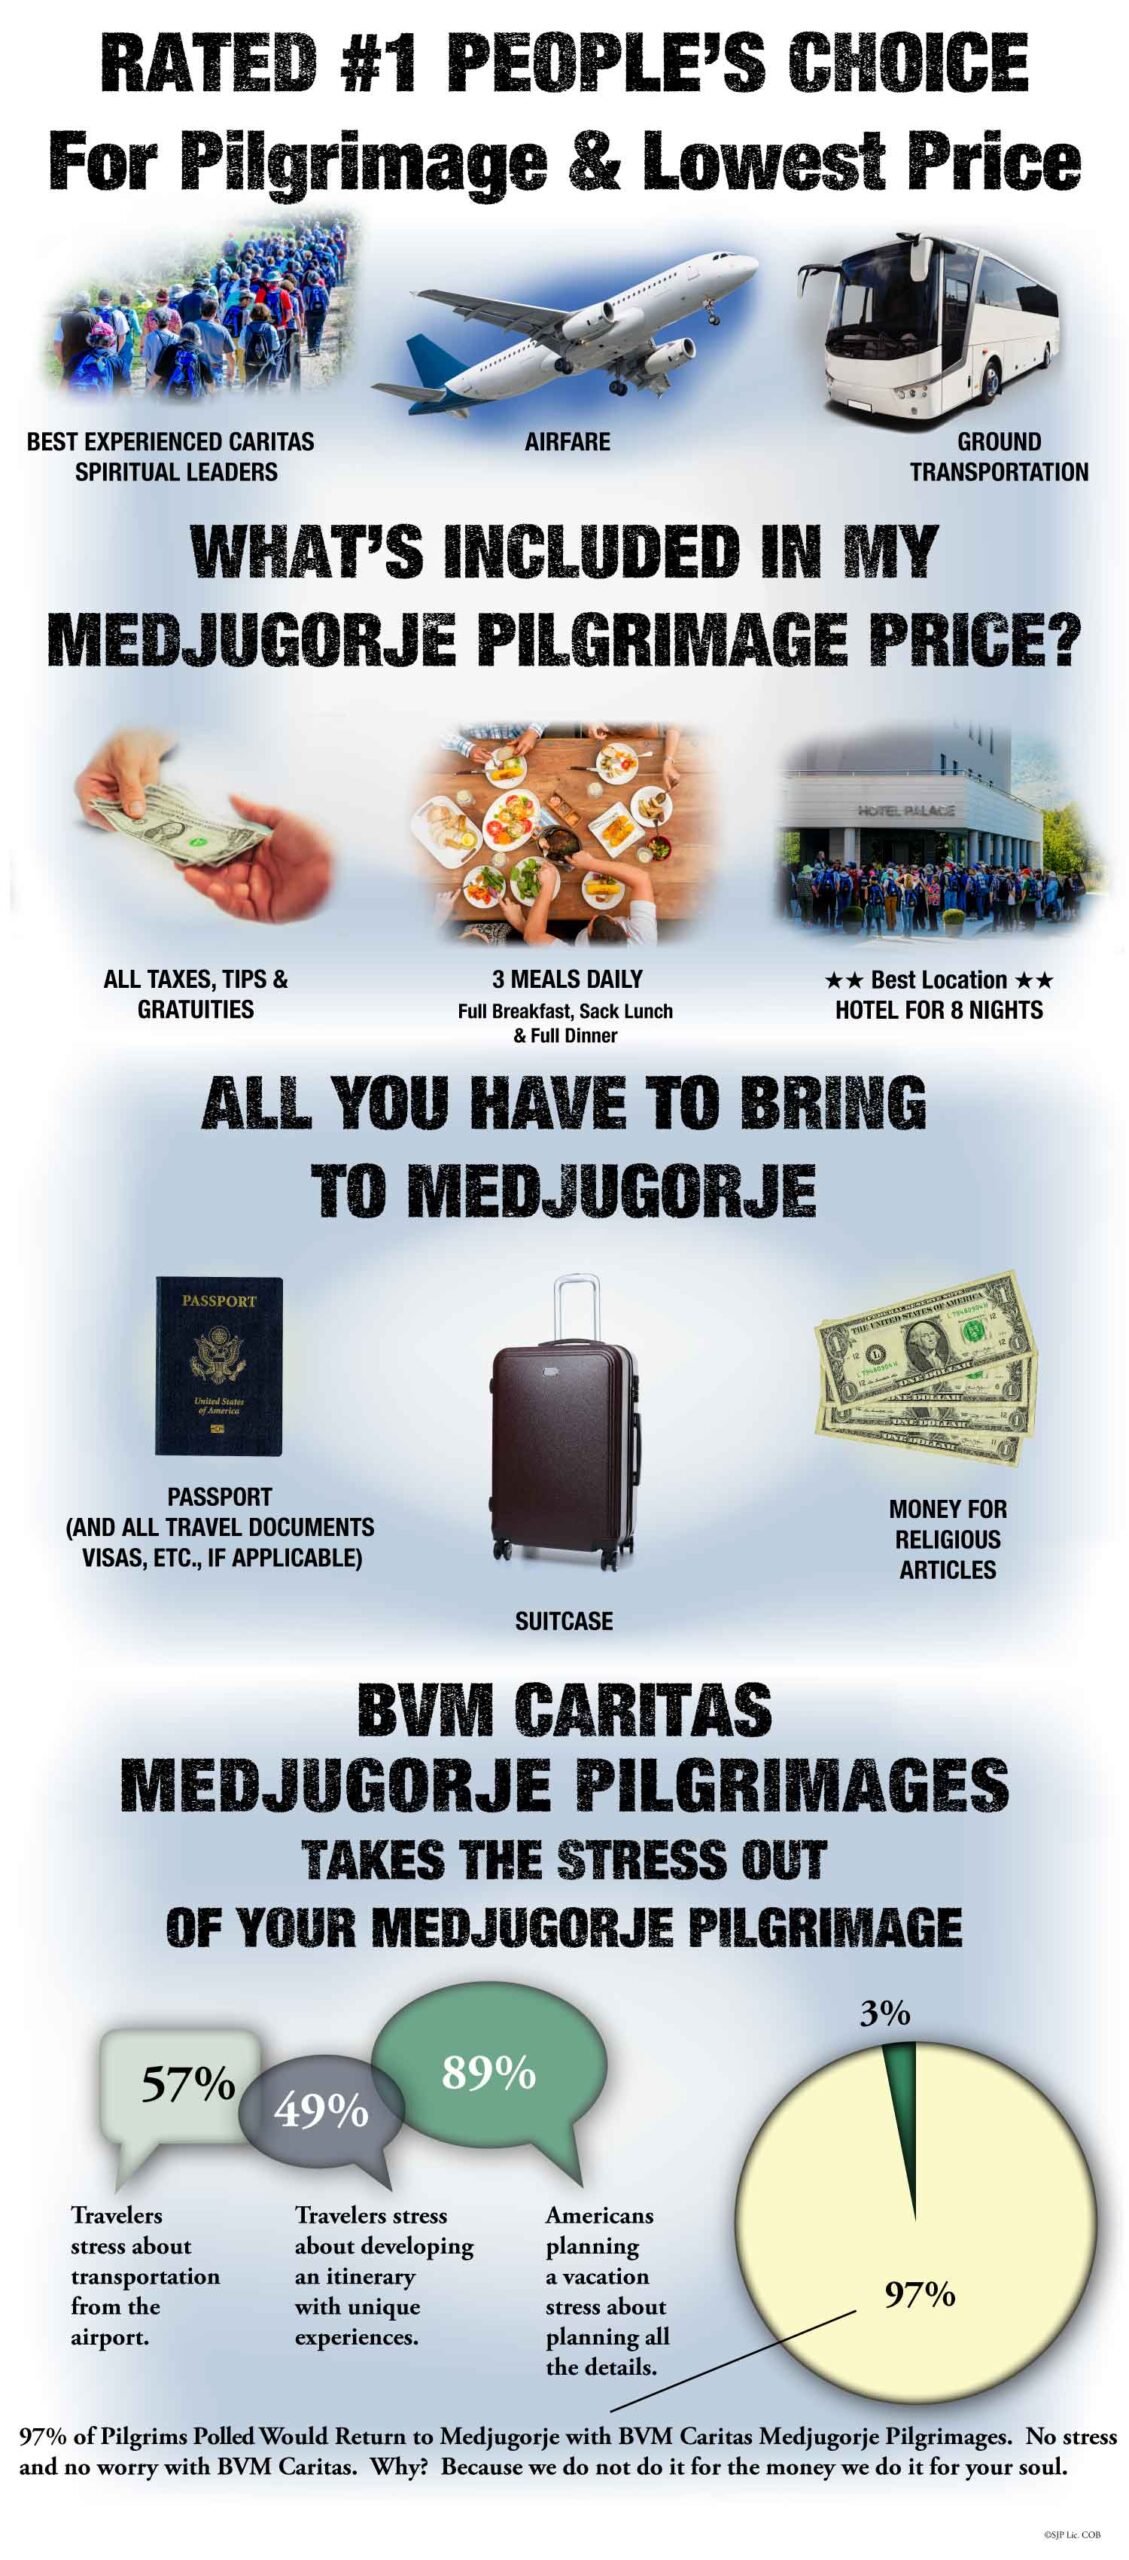 What is included in my Medjugorje Pilgrimage price